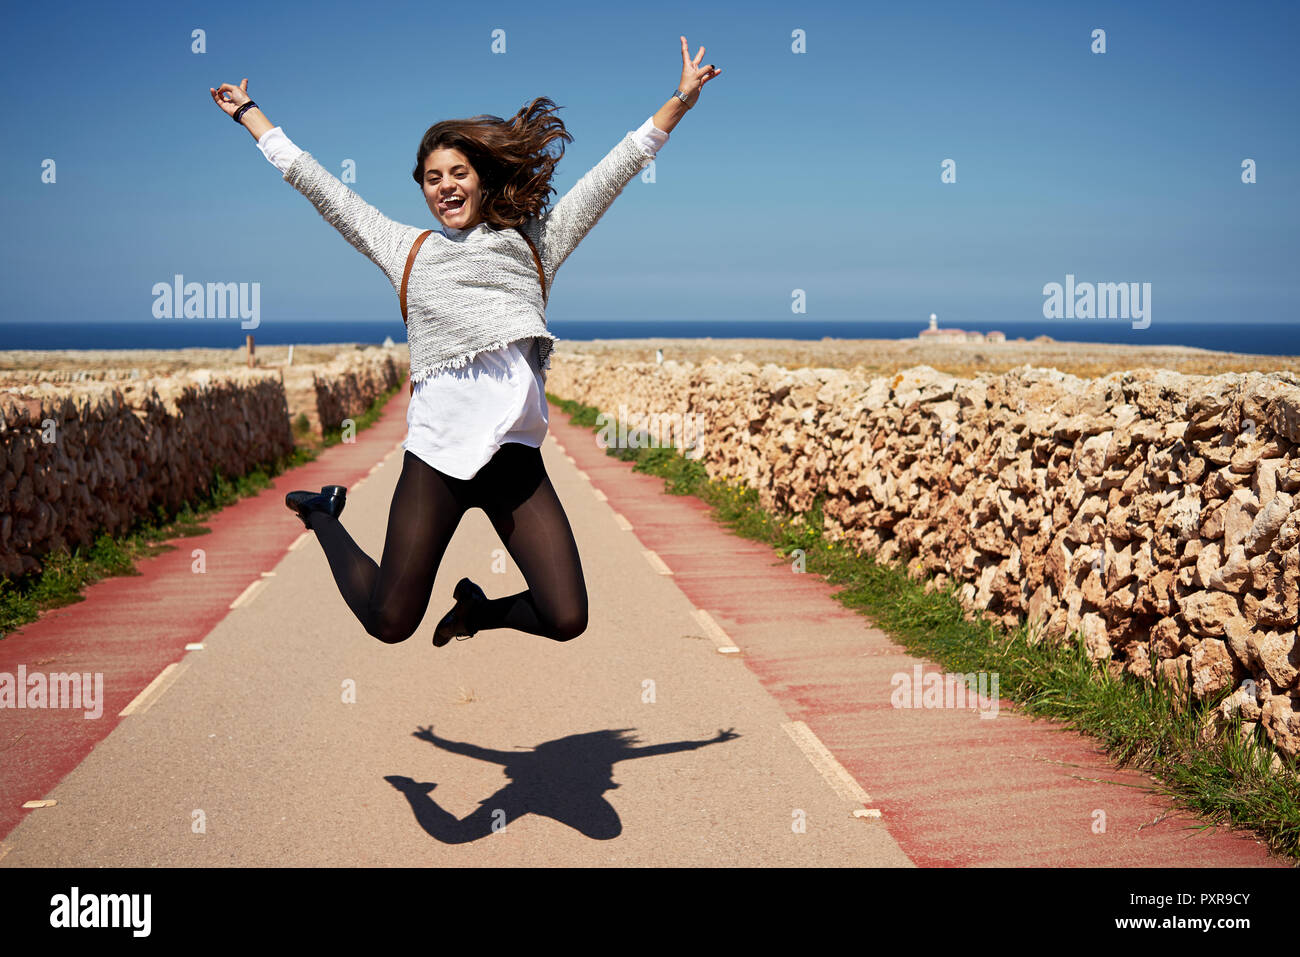 Cheerful young woman jumping in air with rising hands, outdoors Stock Photo